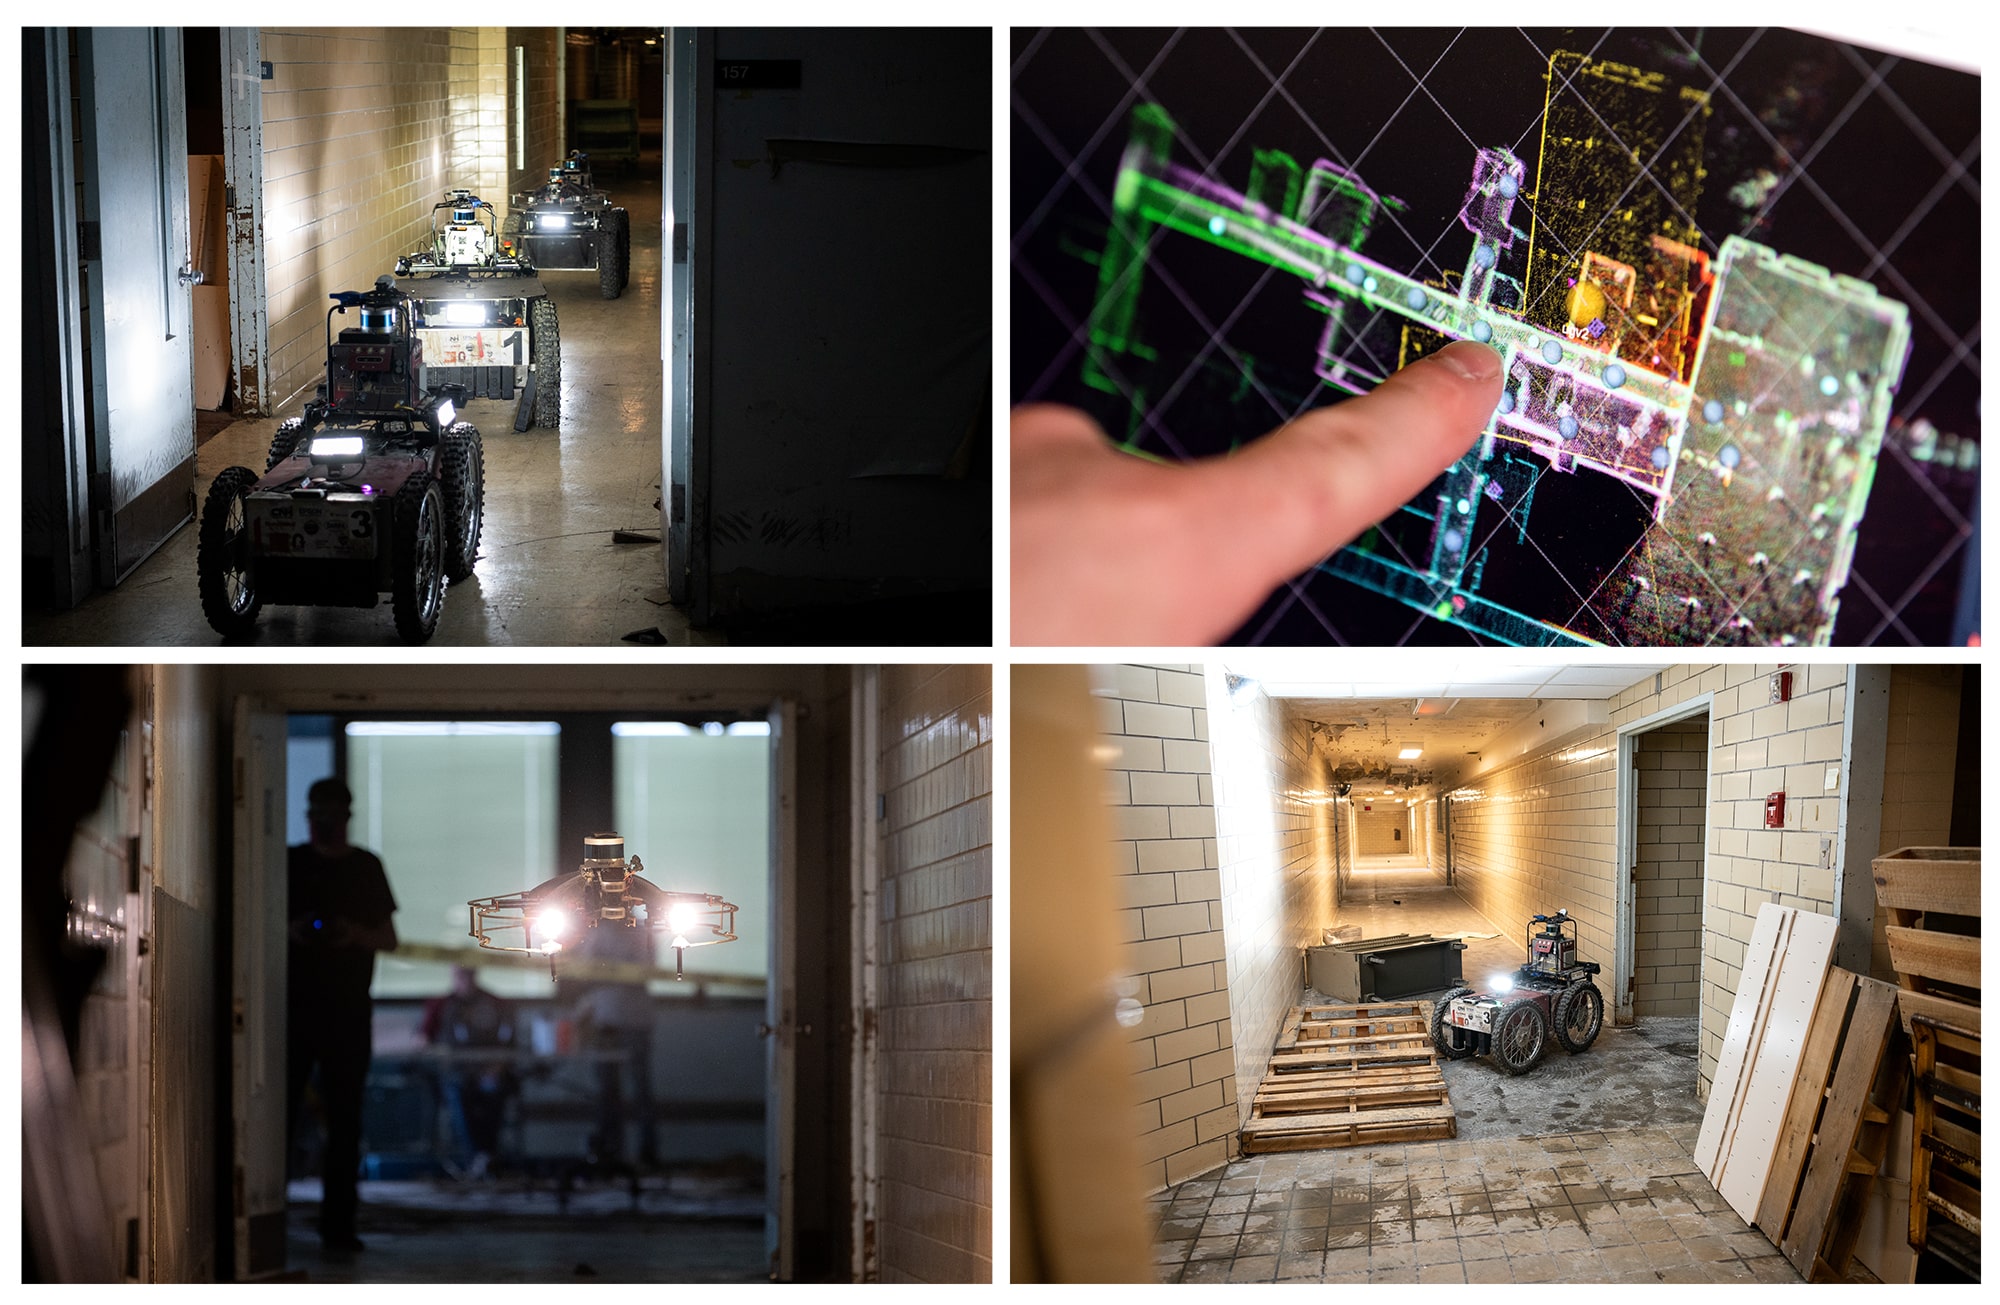 Four images of robots searching a building